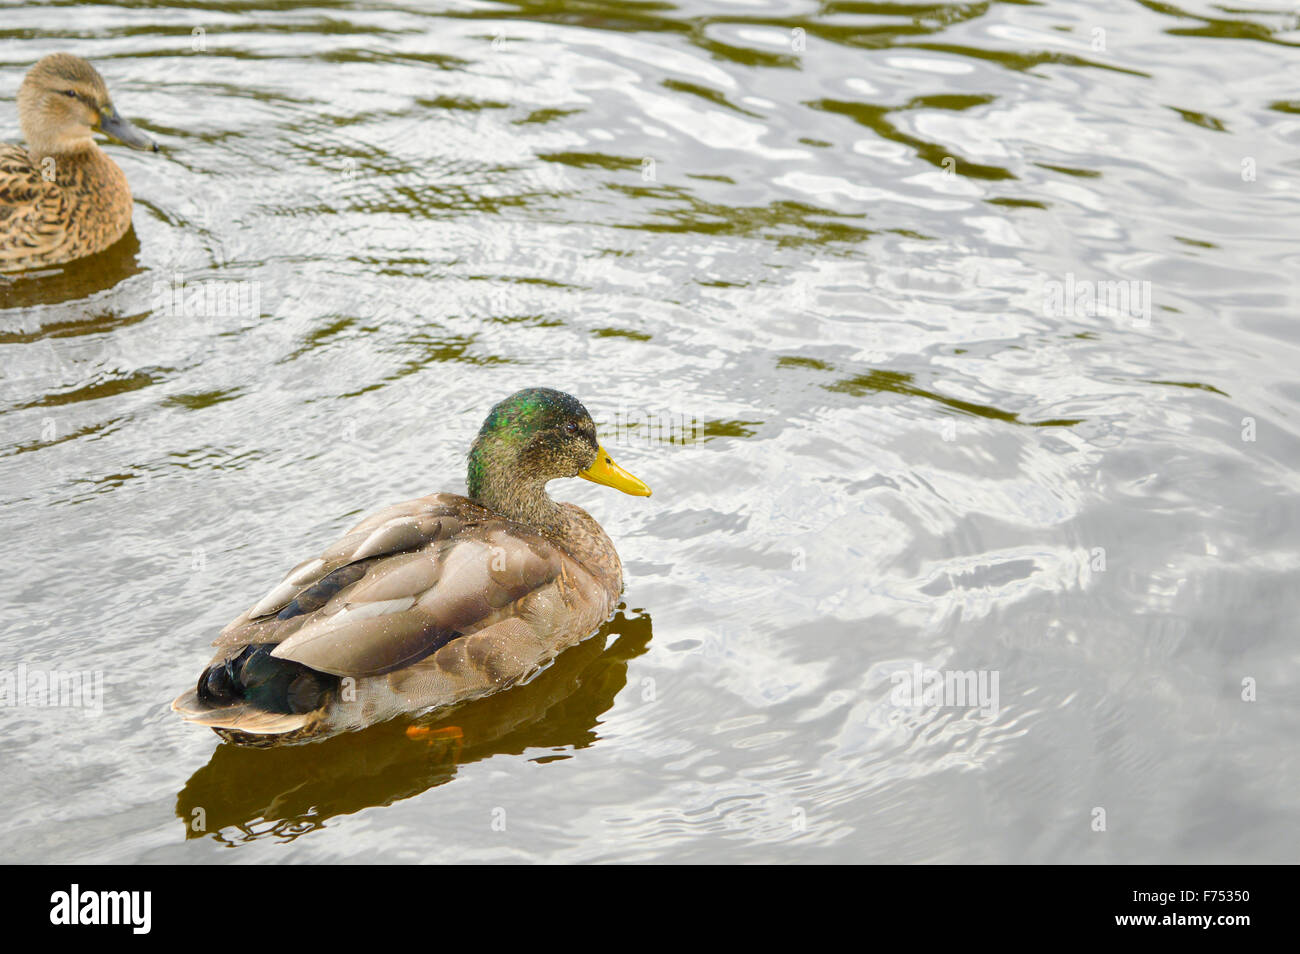 Duck swimming in the lake with a friend duck Stock Photo